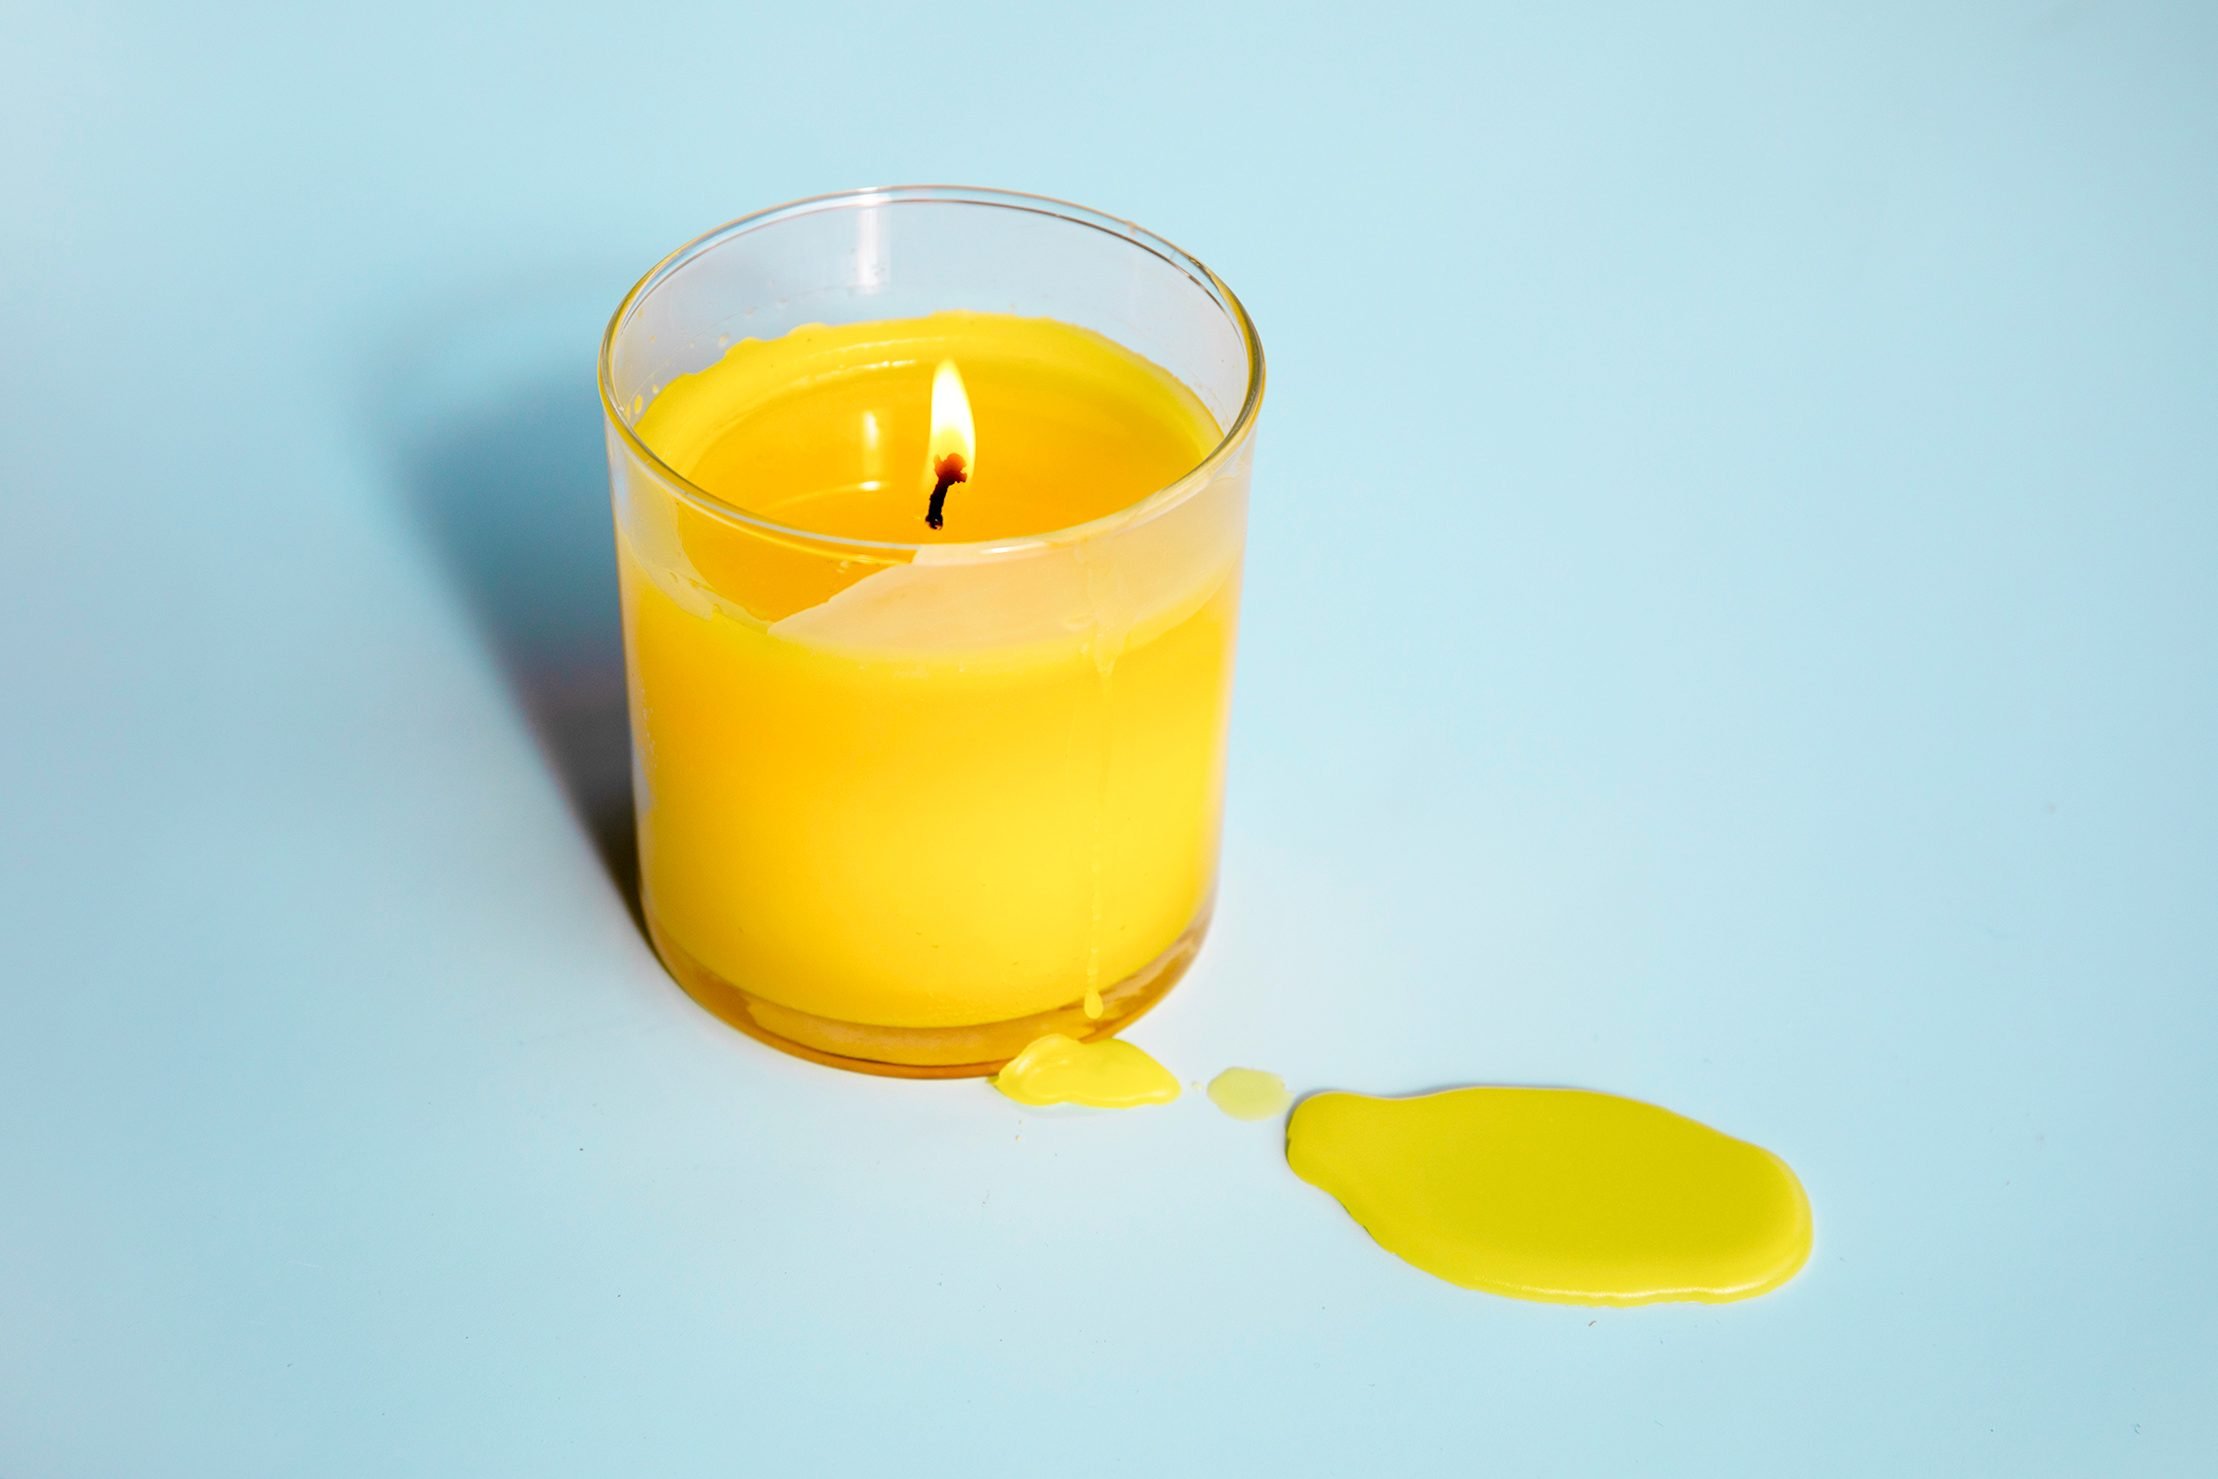 How to Remove Candle Wax From Any Surface - The Maids